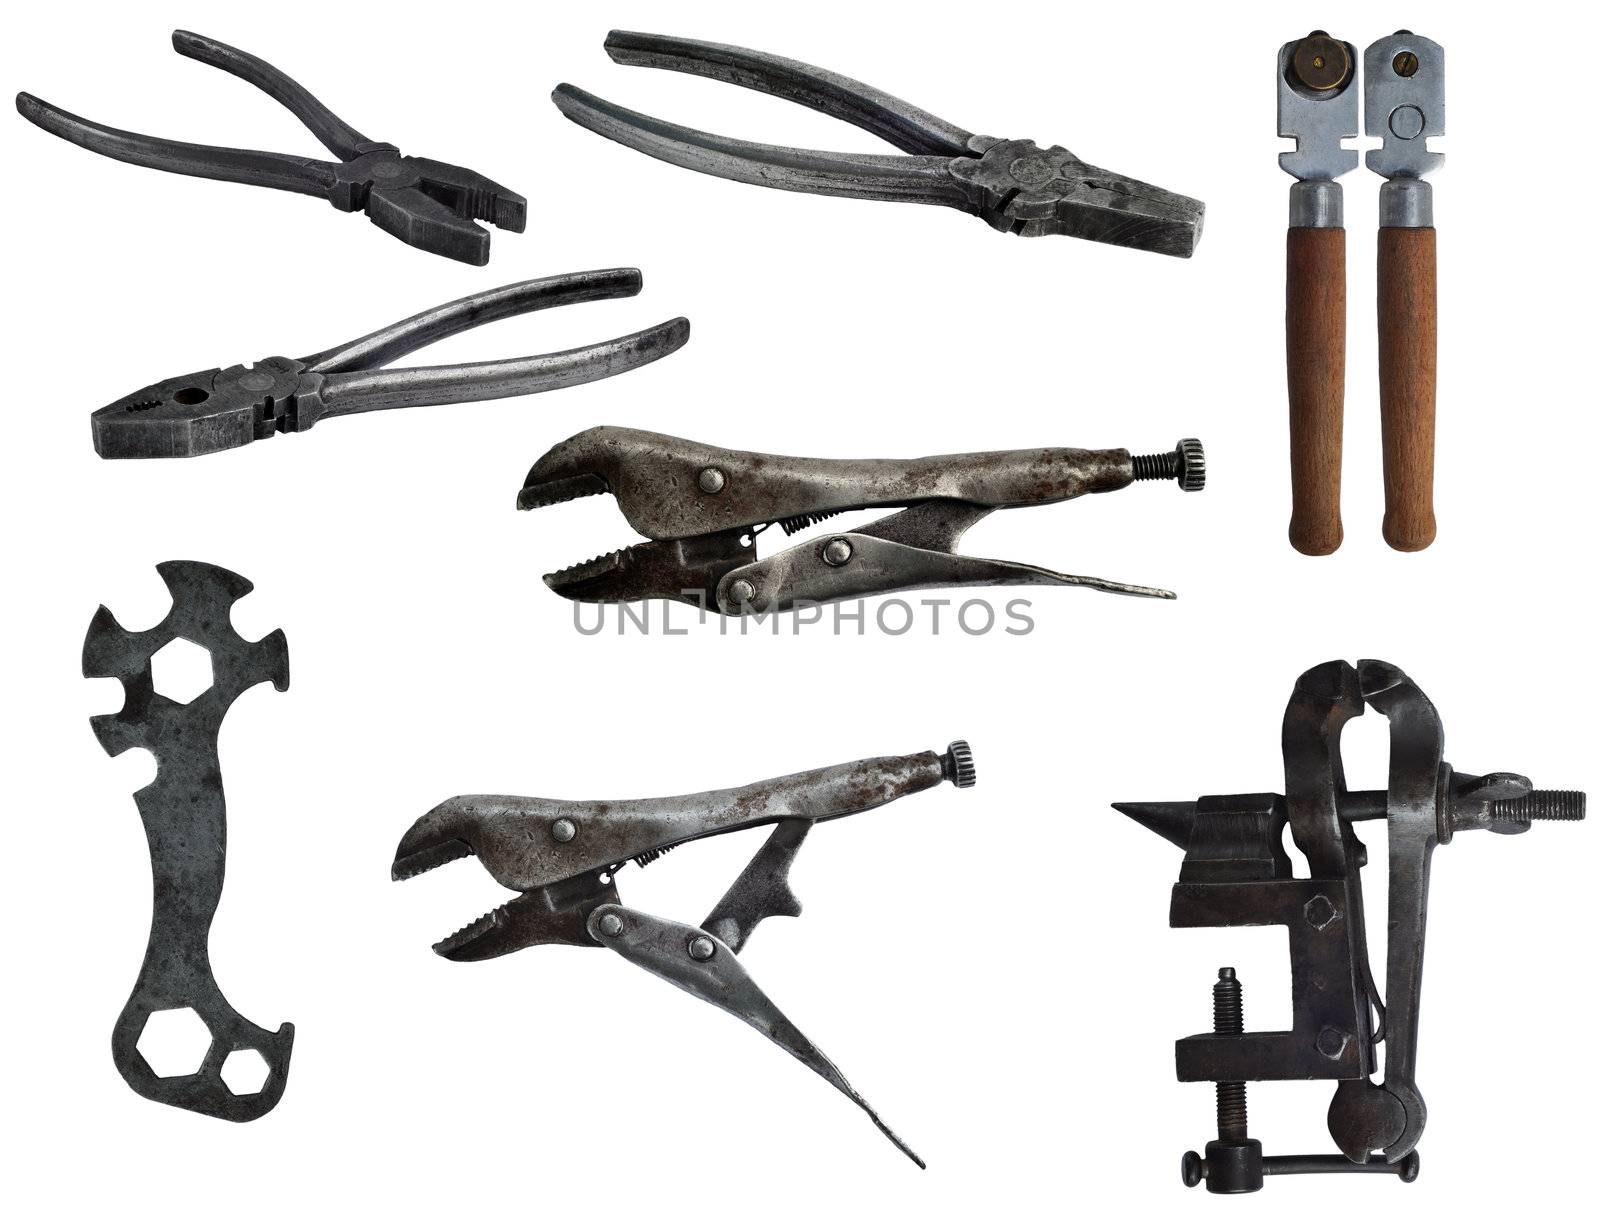 Set of old isolated on white tools of 40-50th years of 20th year: flat-nose pliers, glass-cutter, vice, bicycle spanner